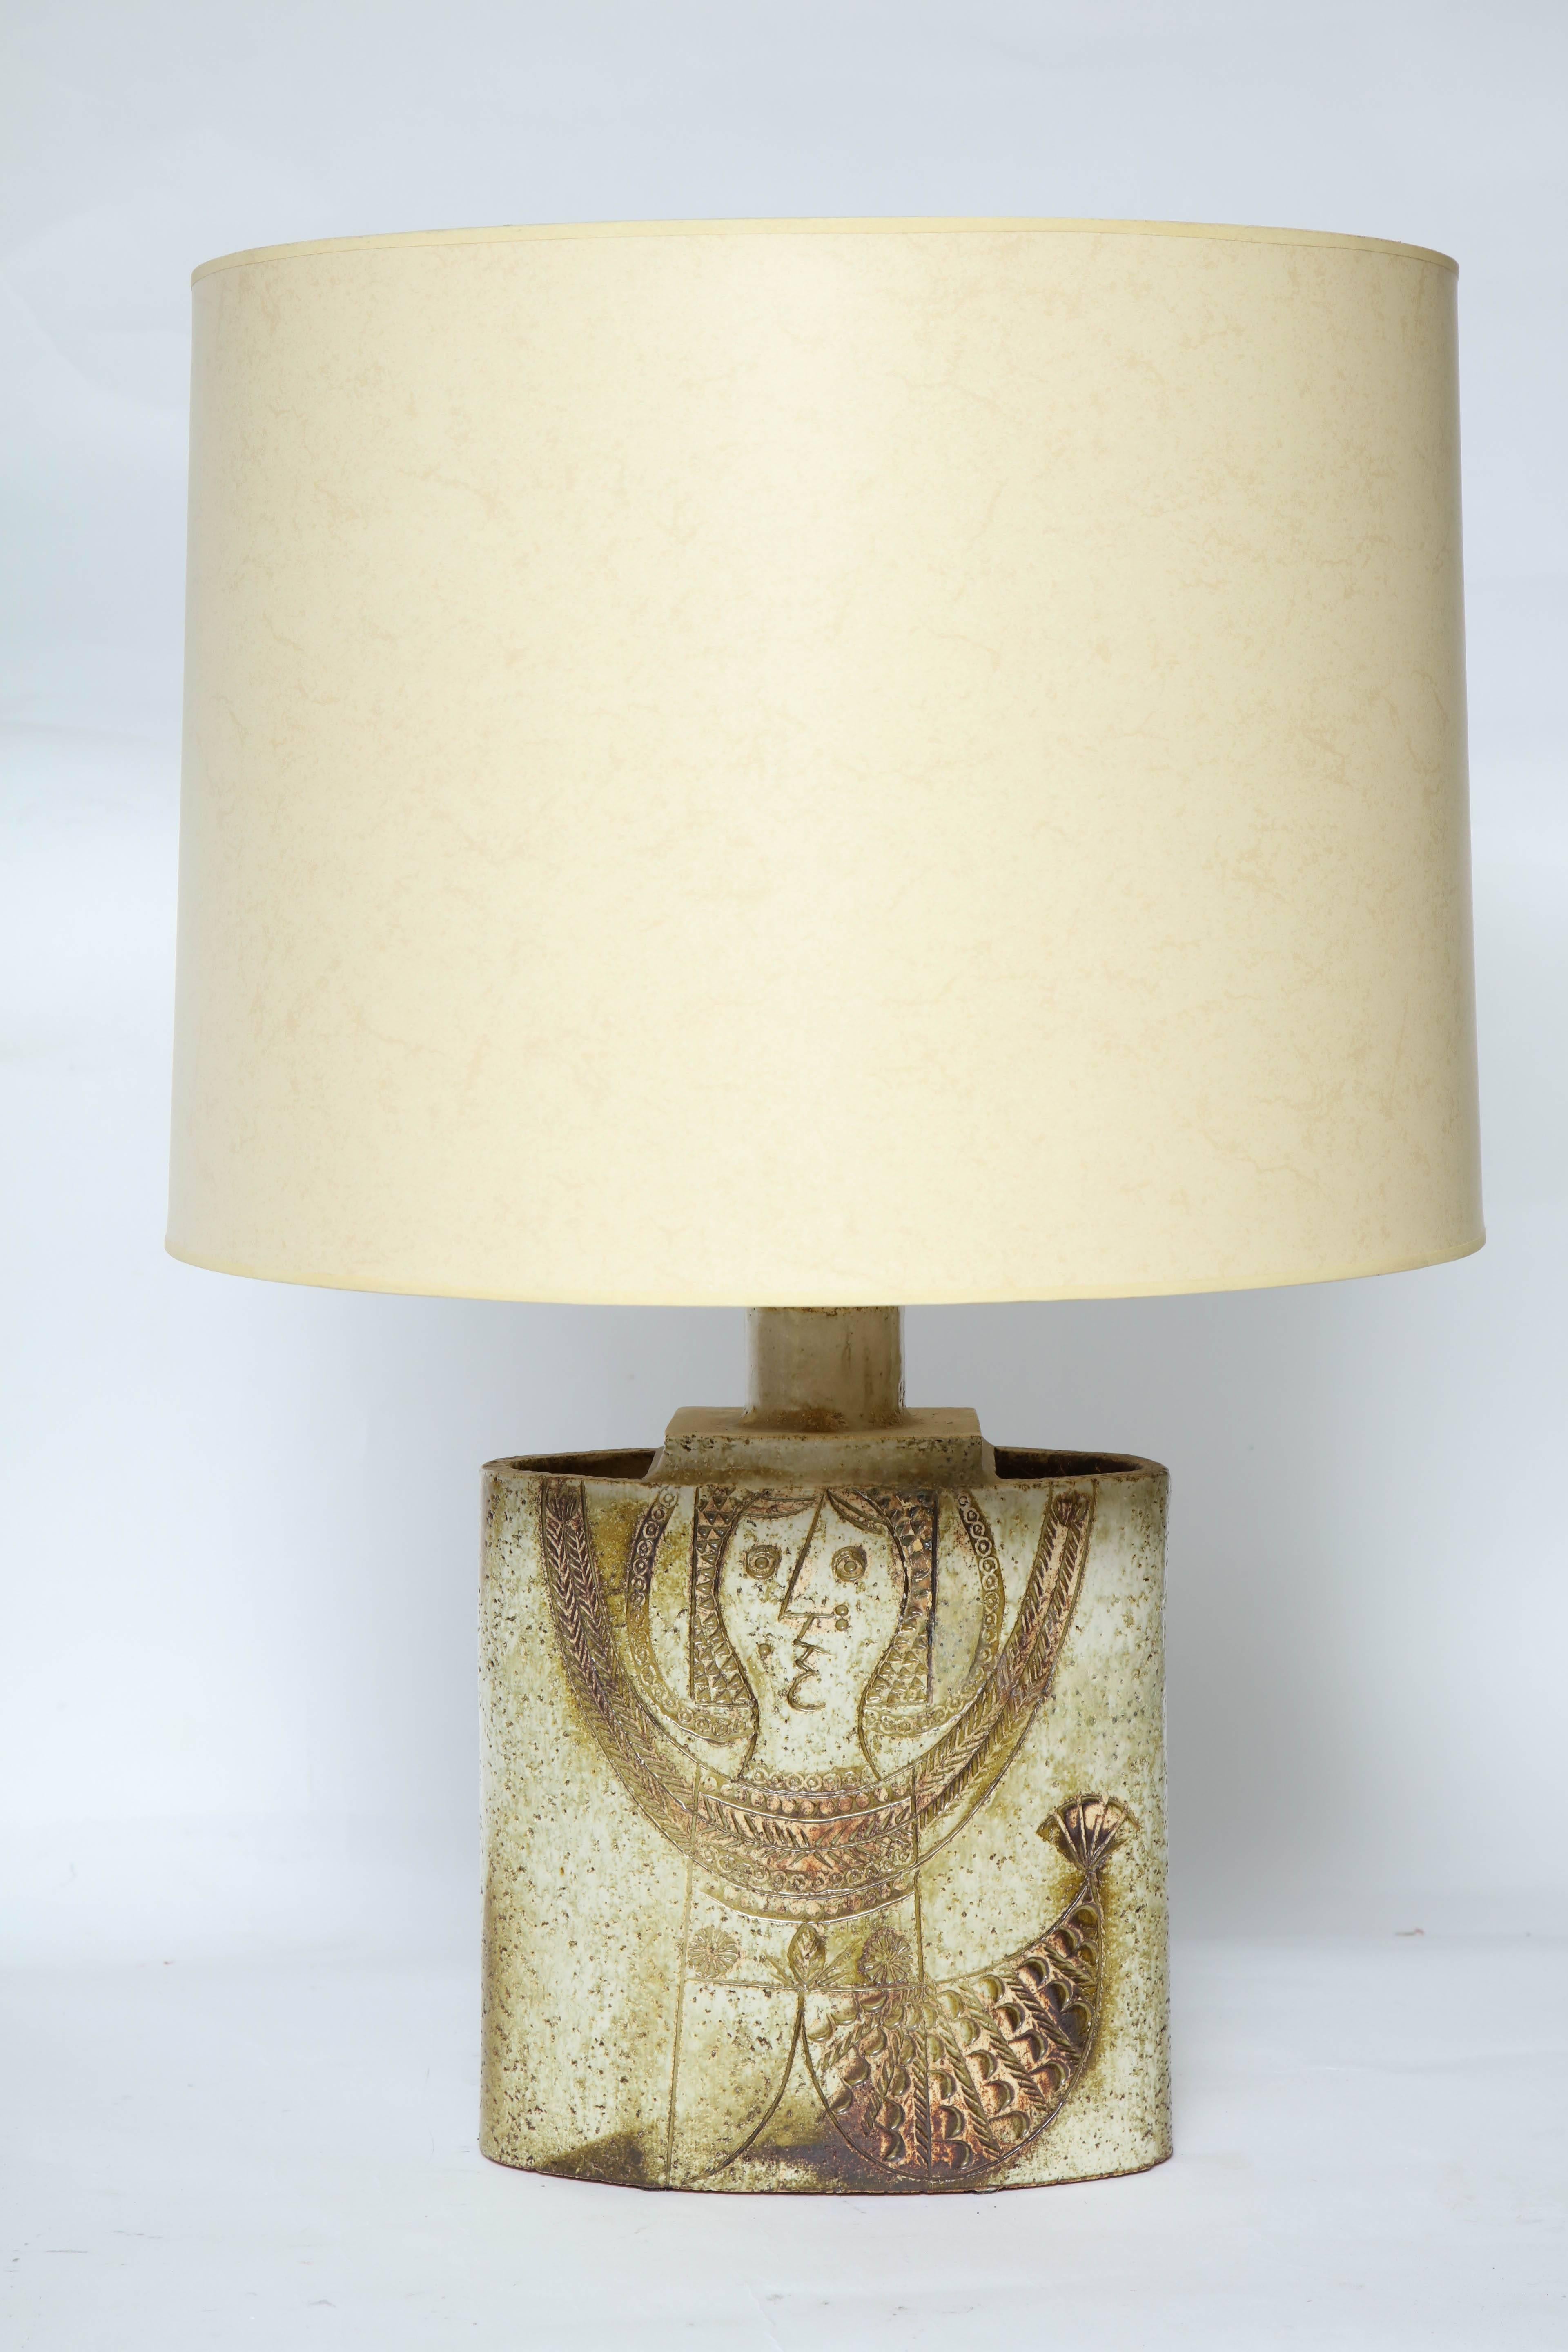 Mid-Century Modern ceramic table lamp signed Capron Valauris Paris, France, circa 1950s
Shade not included.